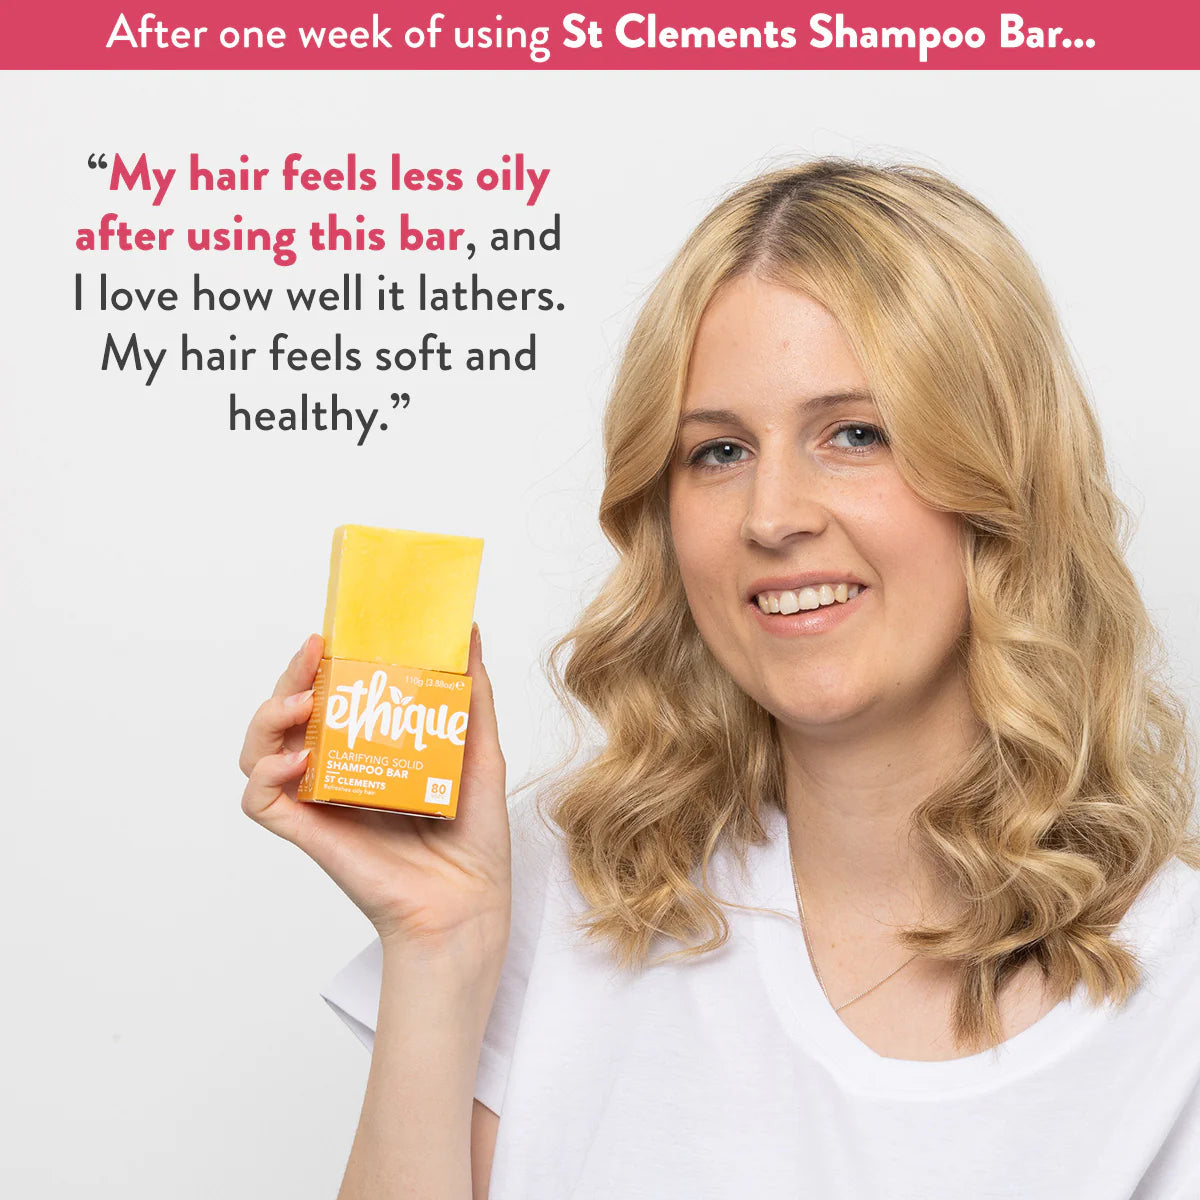 Ethique Clarifying Shampoo Bar for Oily Scalp and Hair: St Clements-The Living Co.